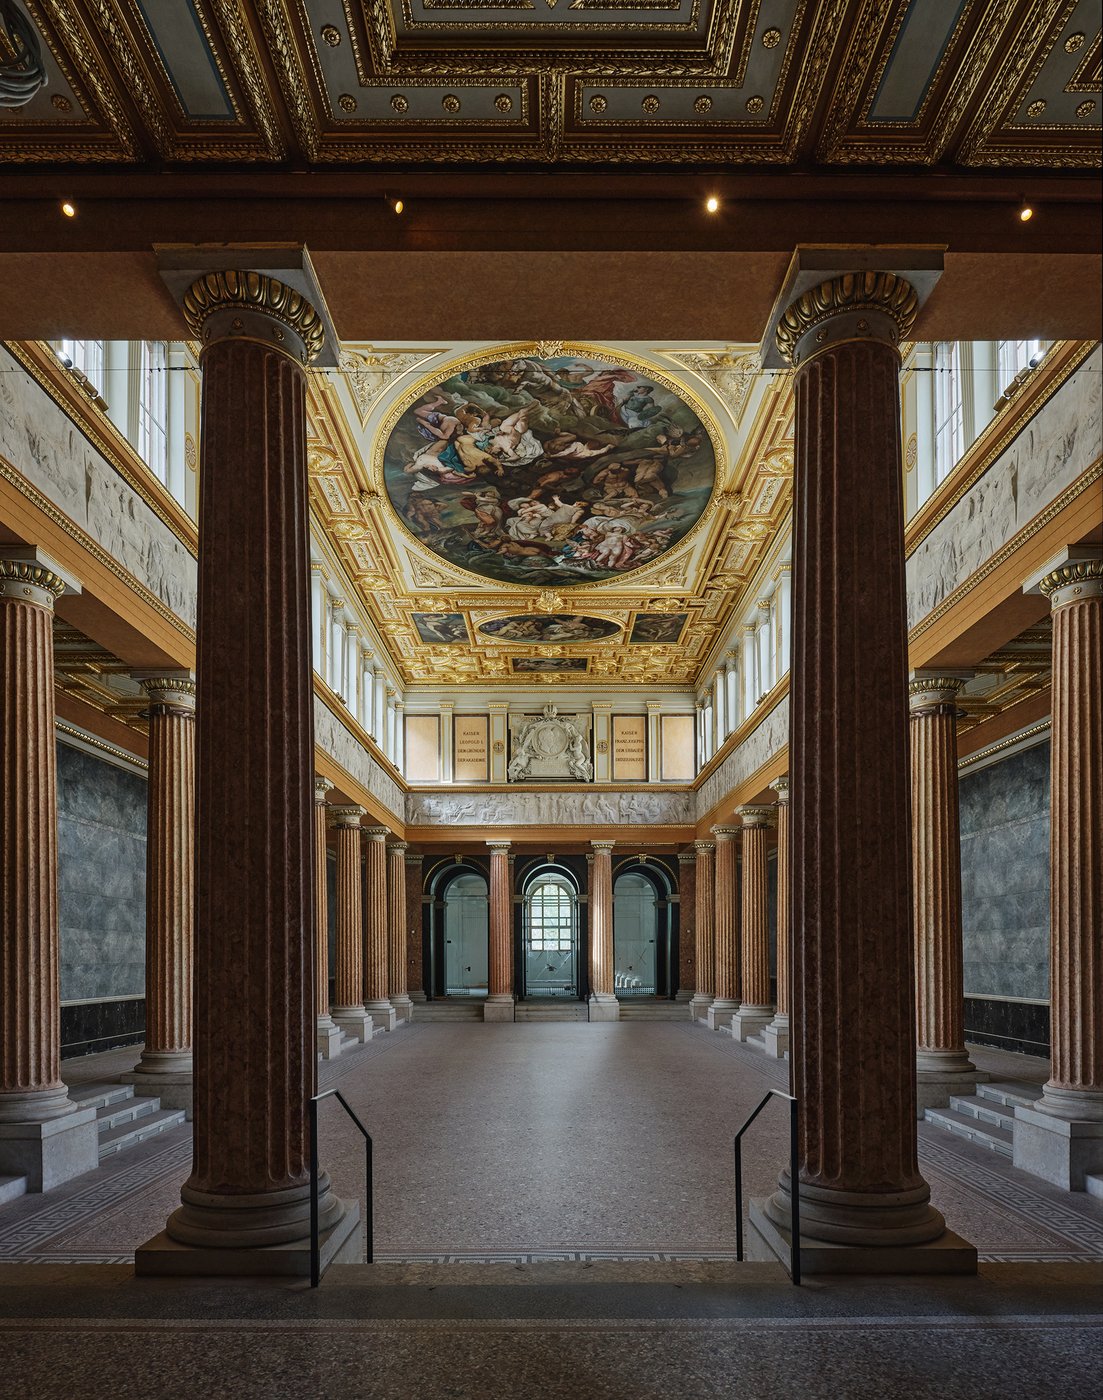 Large festival hall with a perimeter portico and ceiling painting